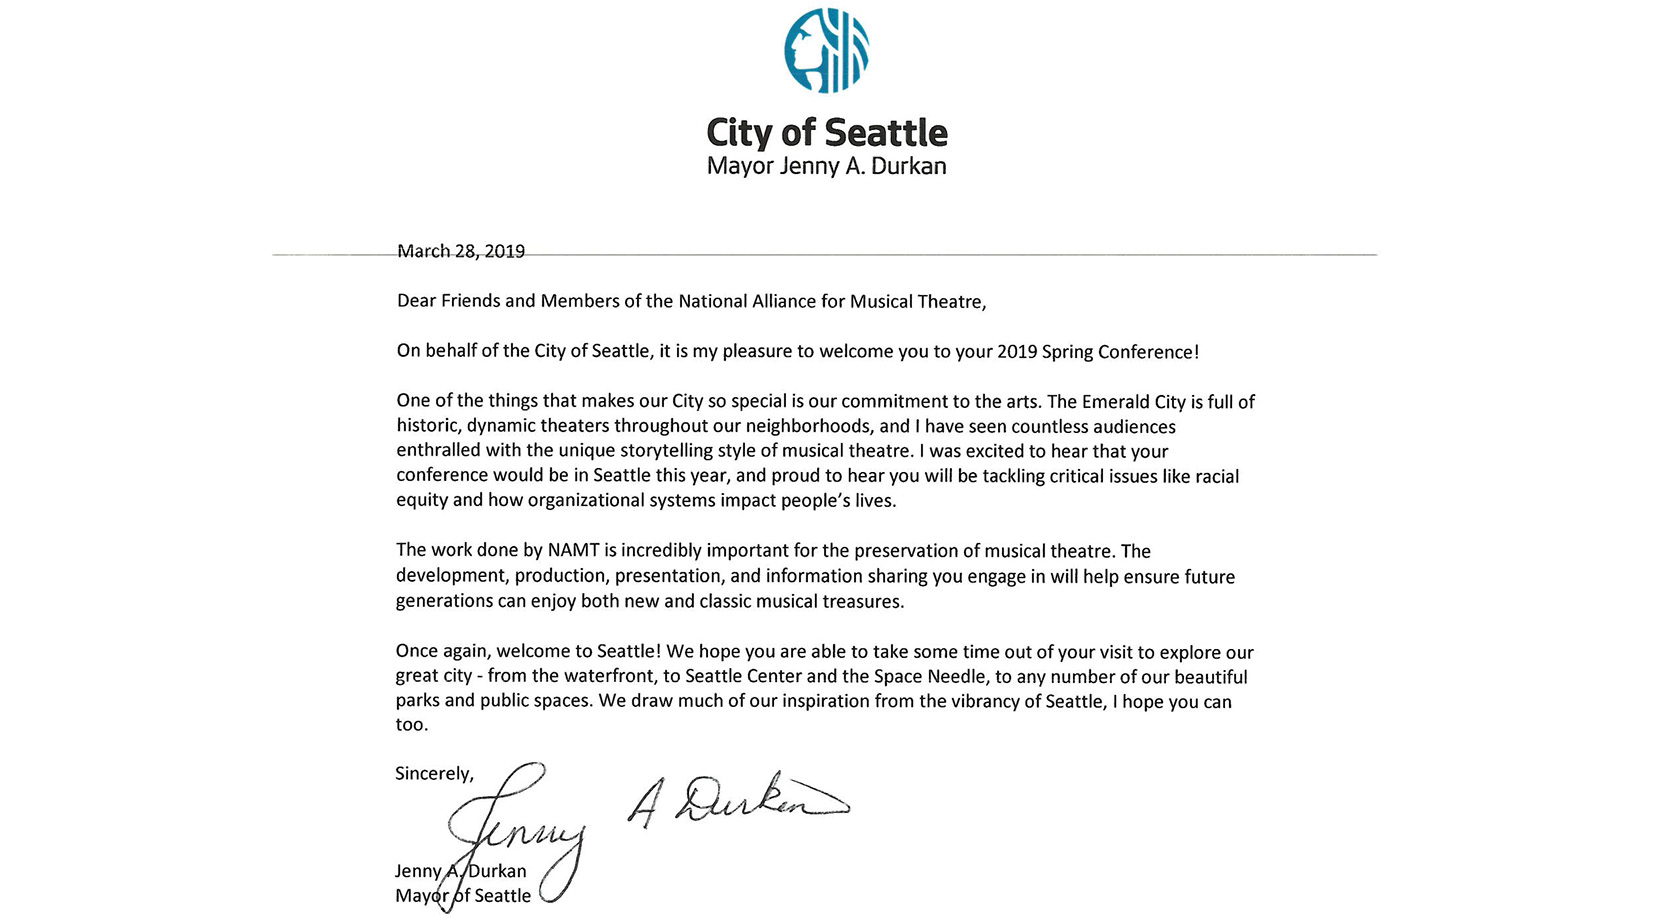 Welcome Letter from the Mayor of Seattle